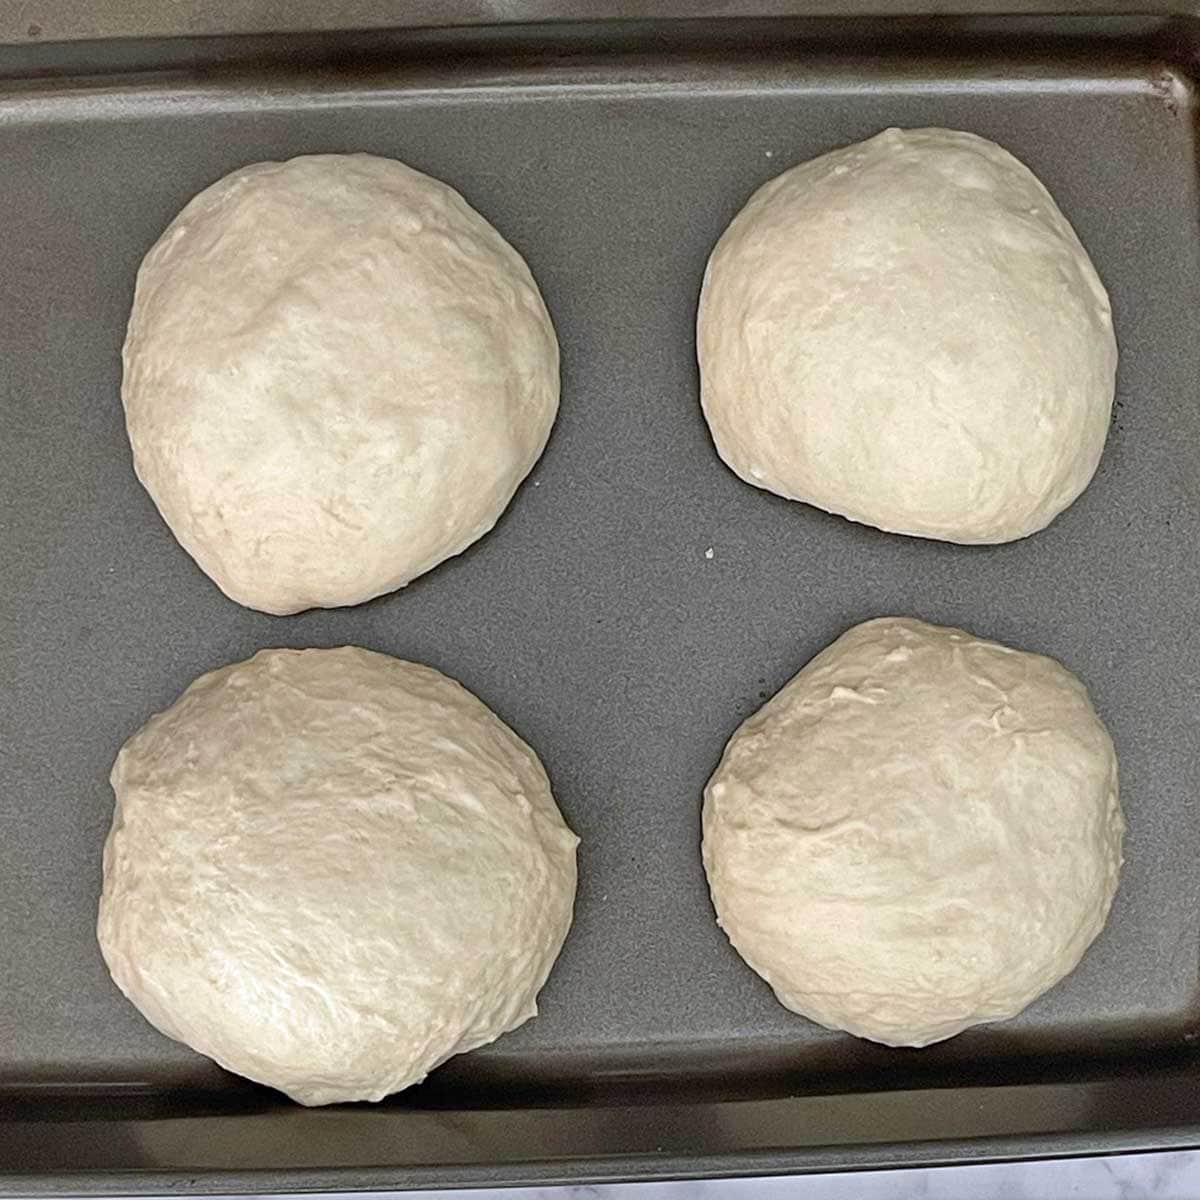 Sub-divided Pizza dough in a tray.